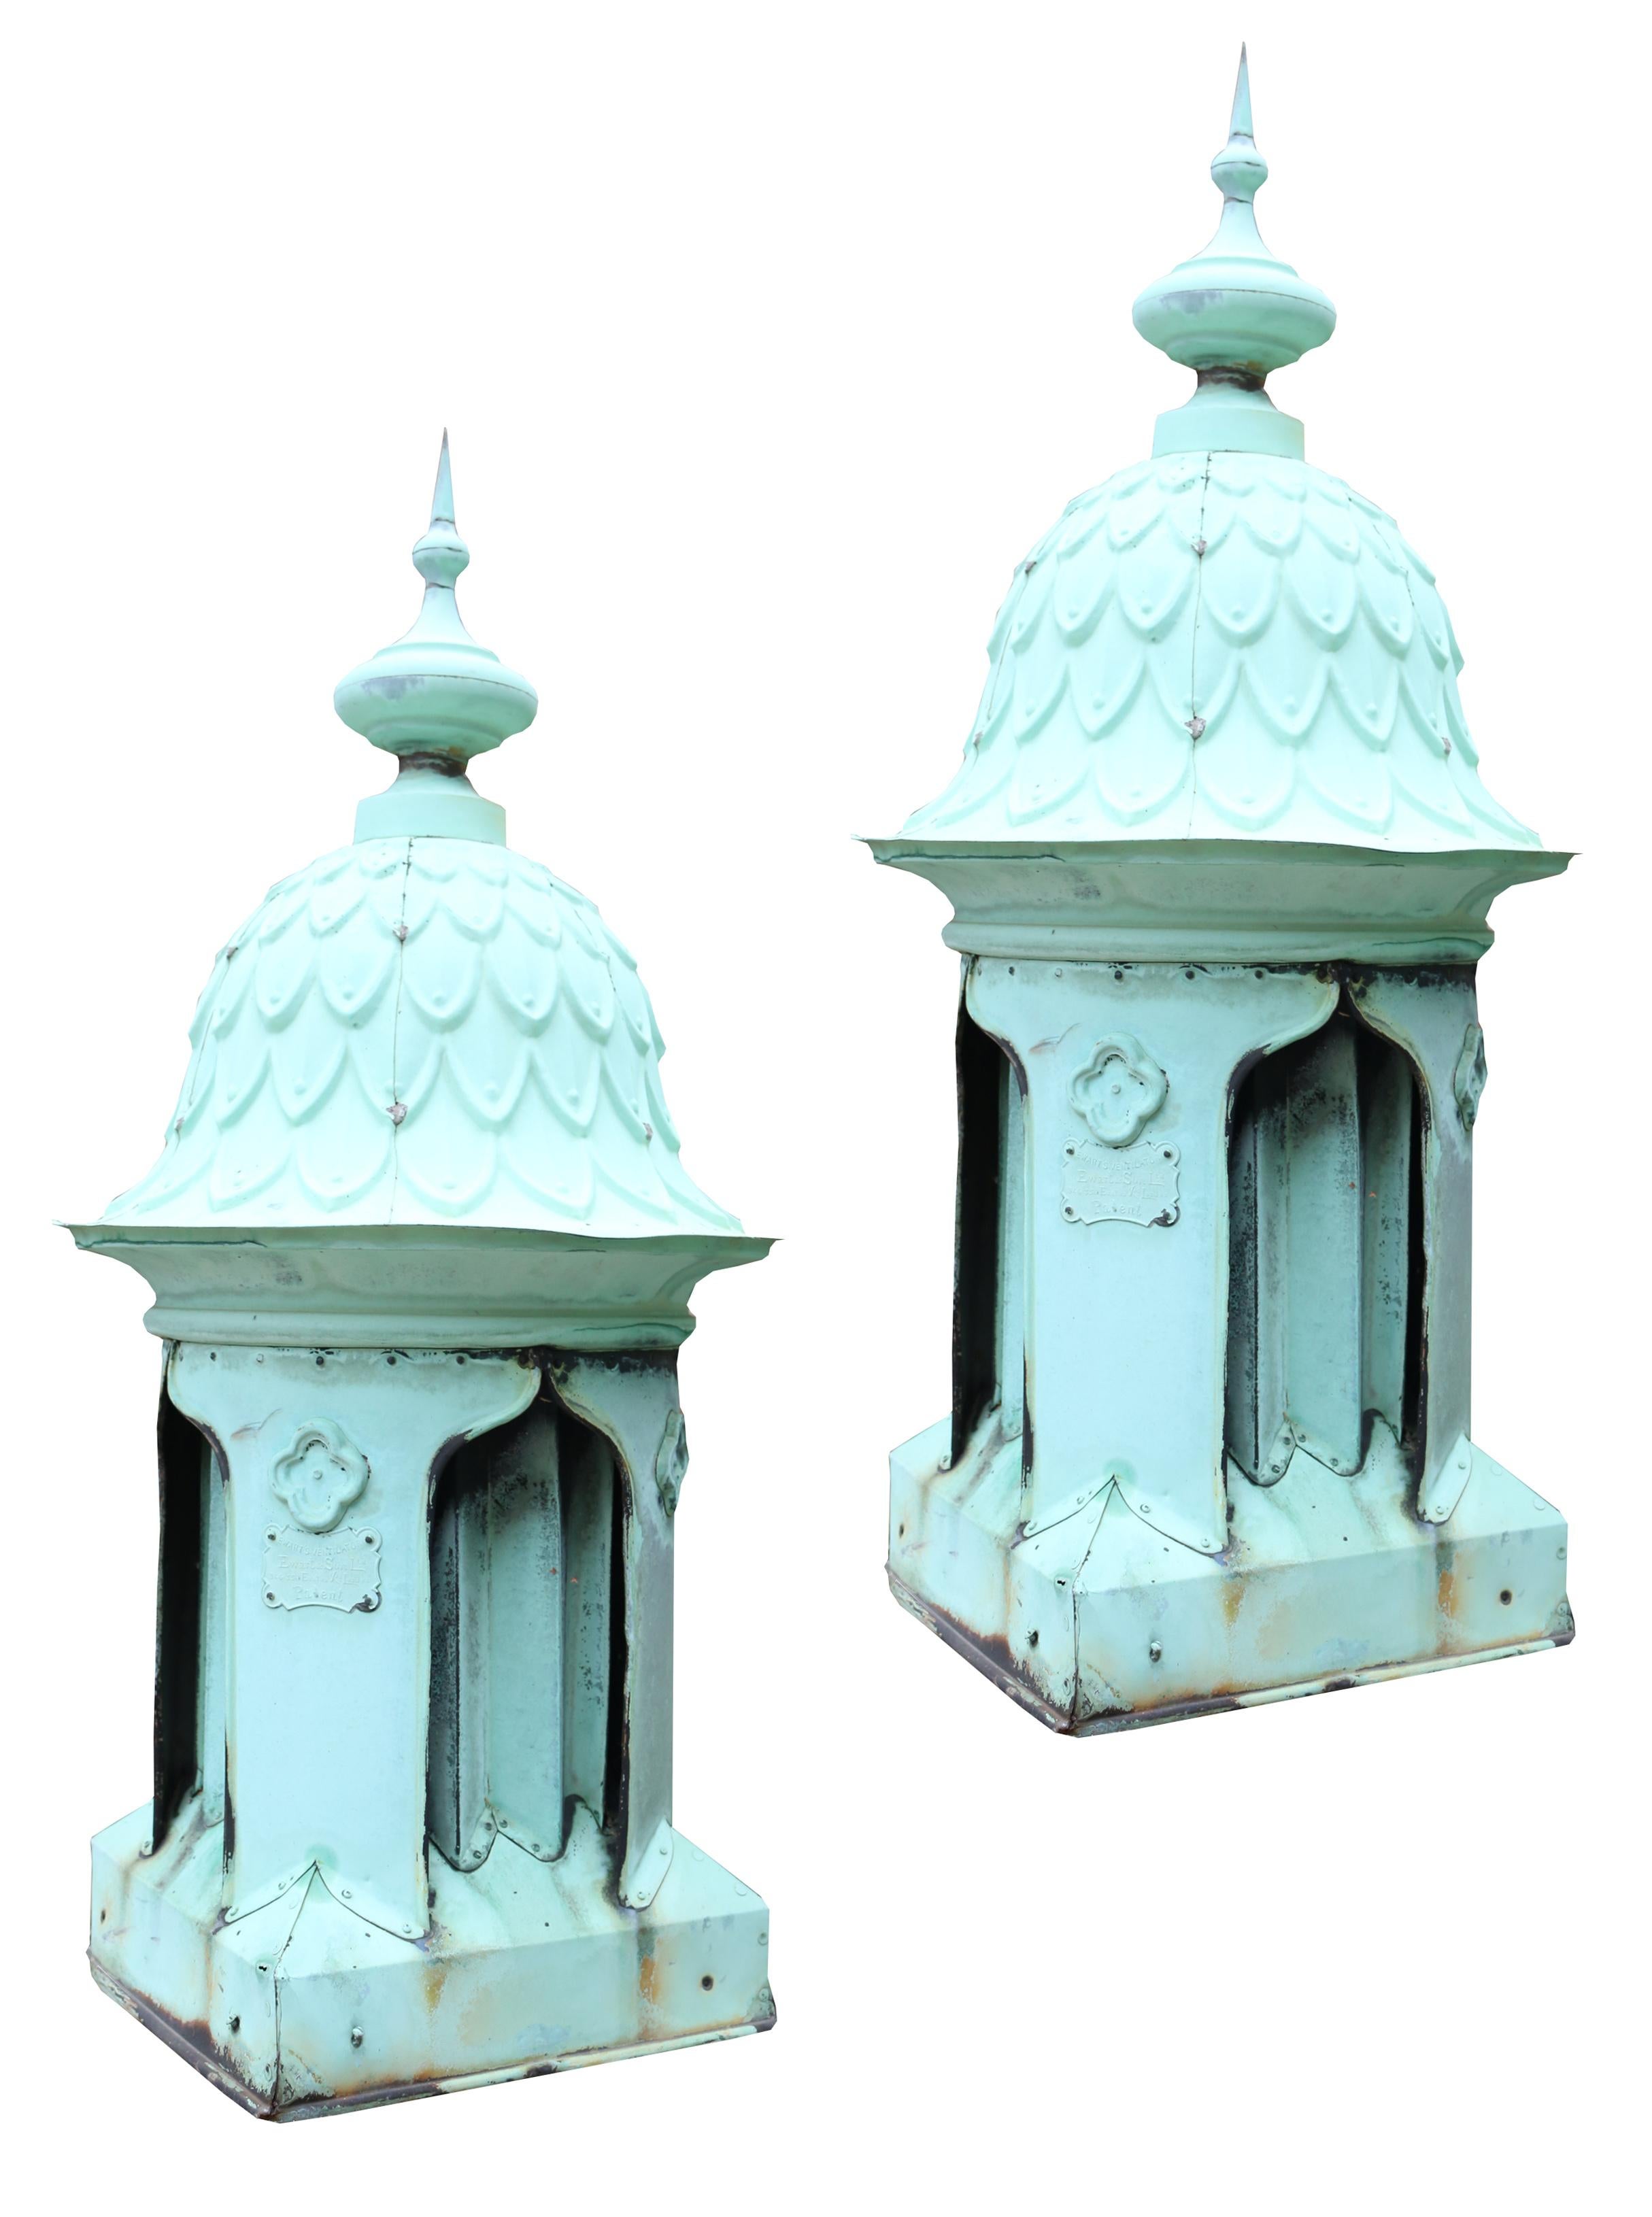 About

These beautiful Victorian zinc roof ventilators were made by ‘Ewarts’ and date to circa 1890. Price is per ventilator.

They are finished in a weathered copper color. 

This pair can be sold separately.

Country of origin: